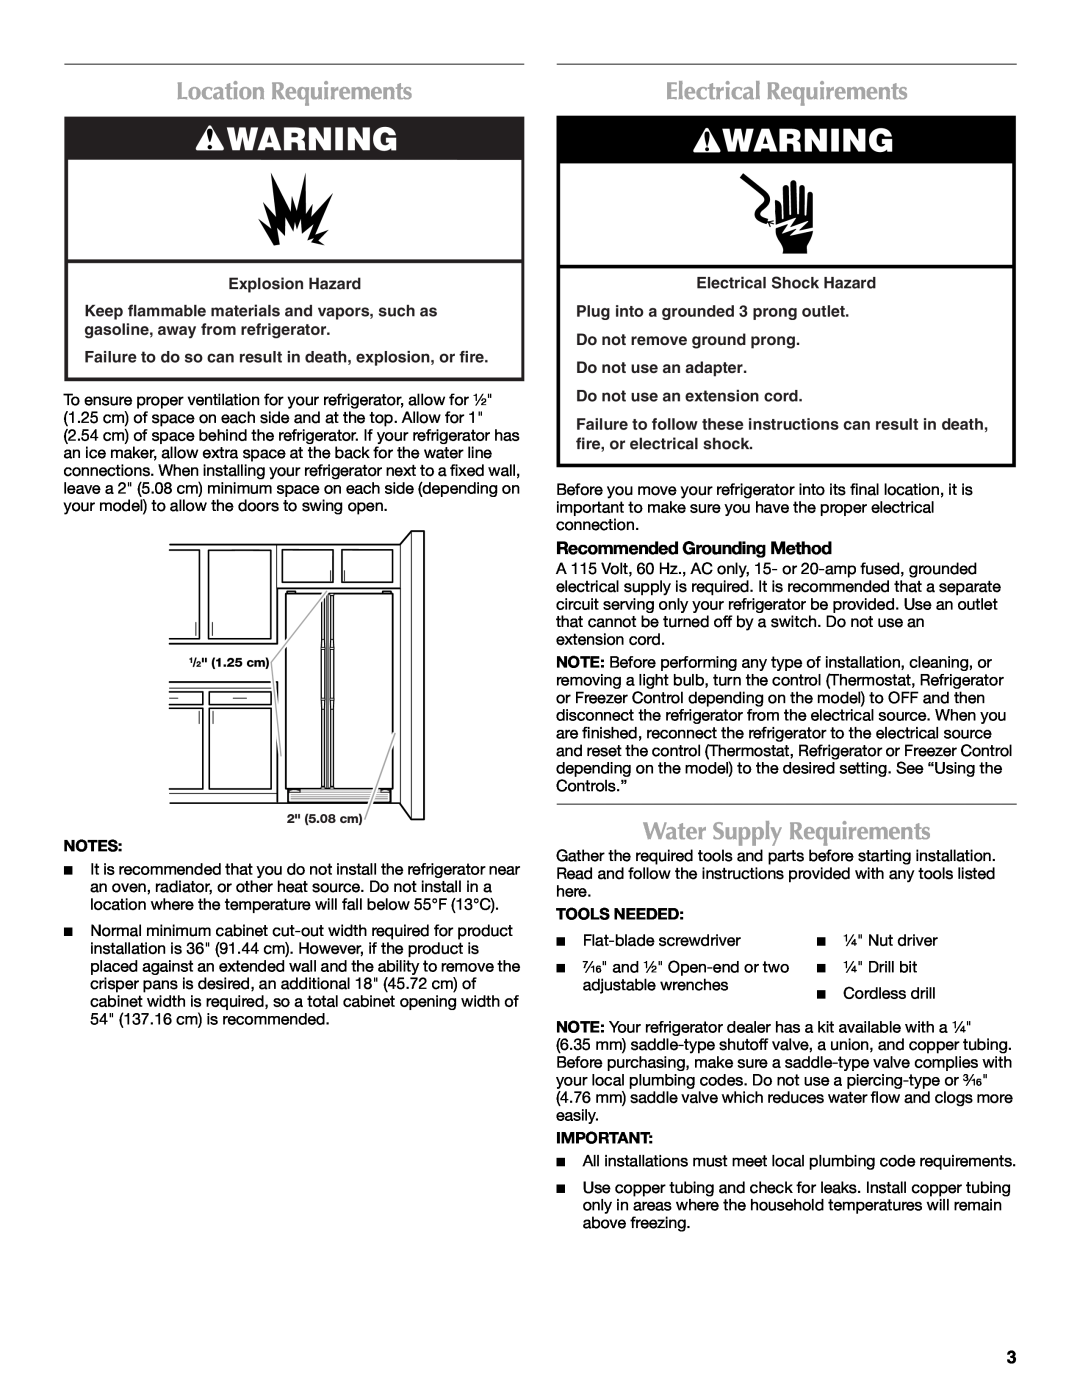 Maytag W10321480A Location Requirements, Electrical Requirements, Water Supply Requirements, Recommended Grounding Method 